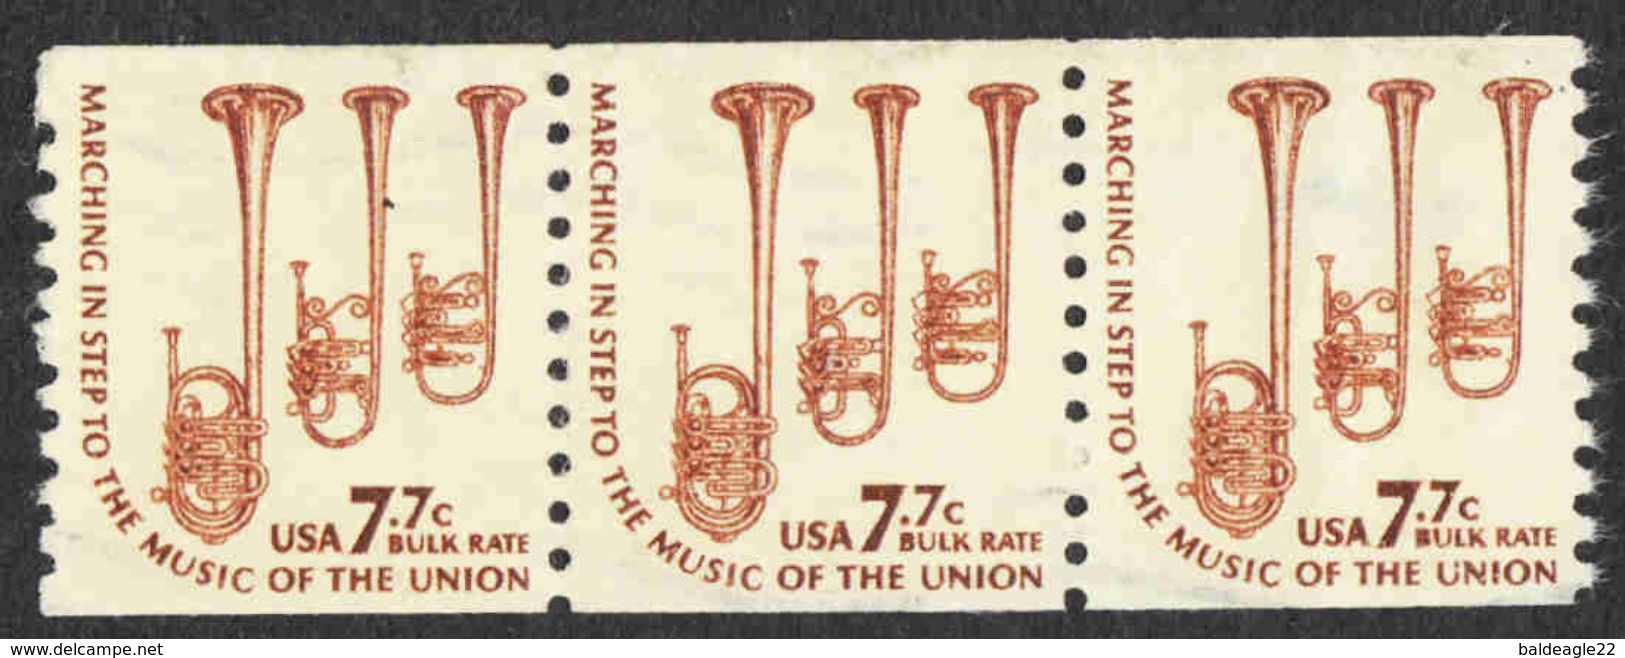 United States - Scott #1614 Used - Strip Of 3 - Coils & Coil Singles